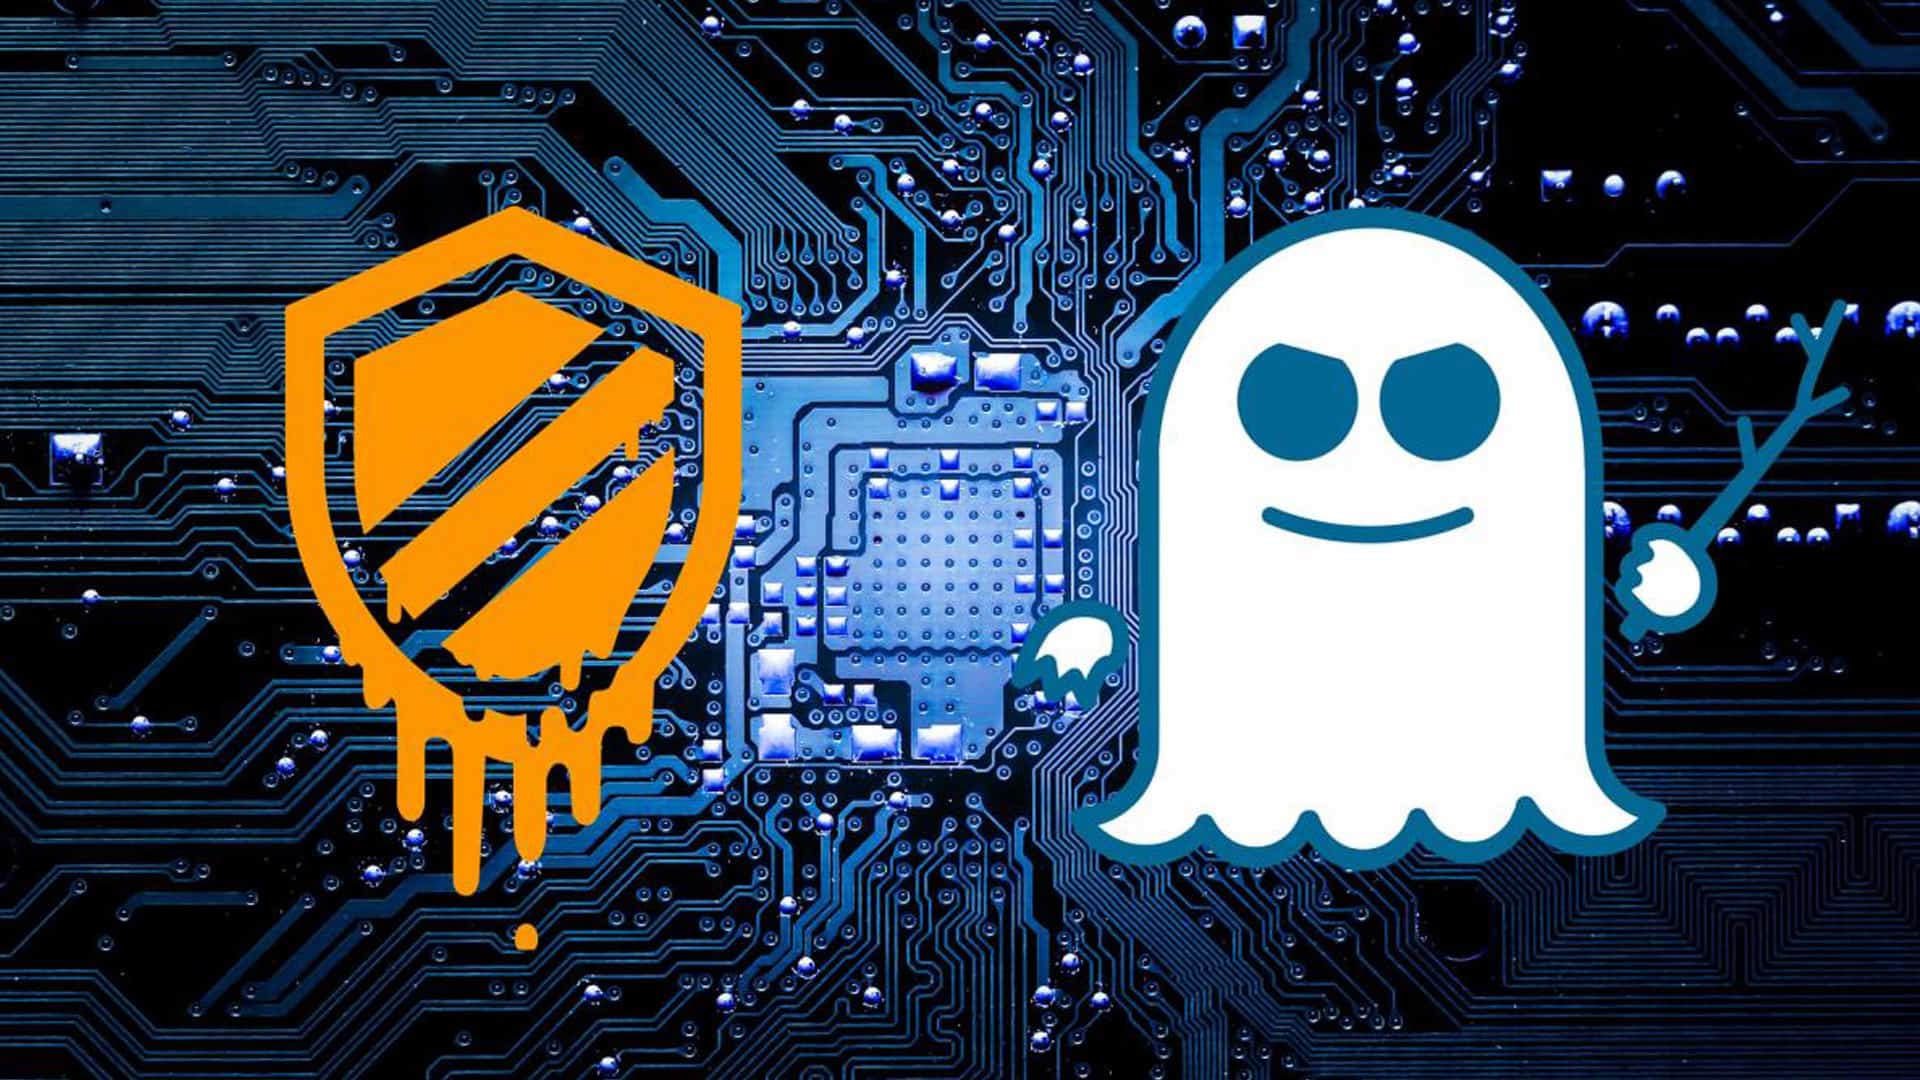 meltdown and spectre malware images.